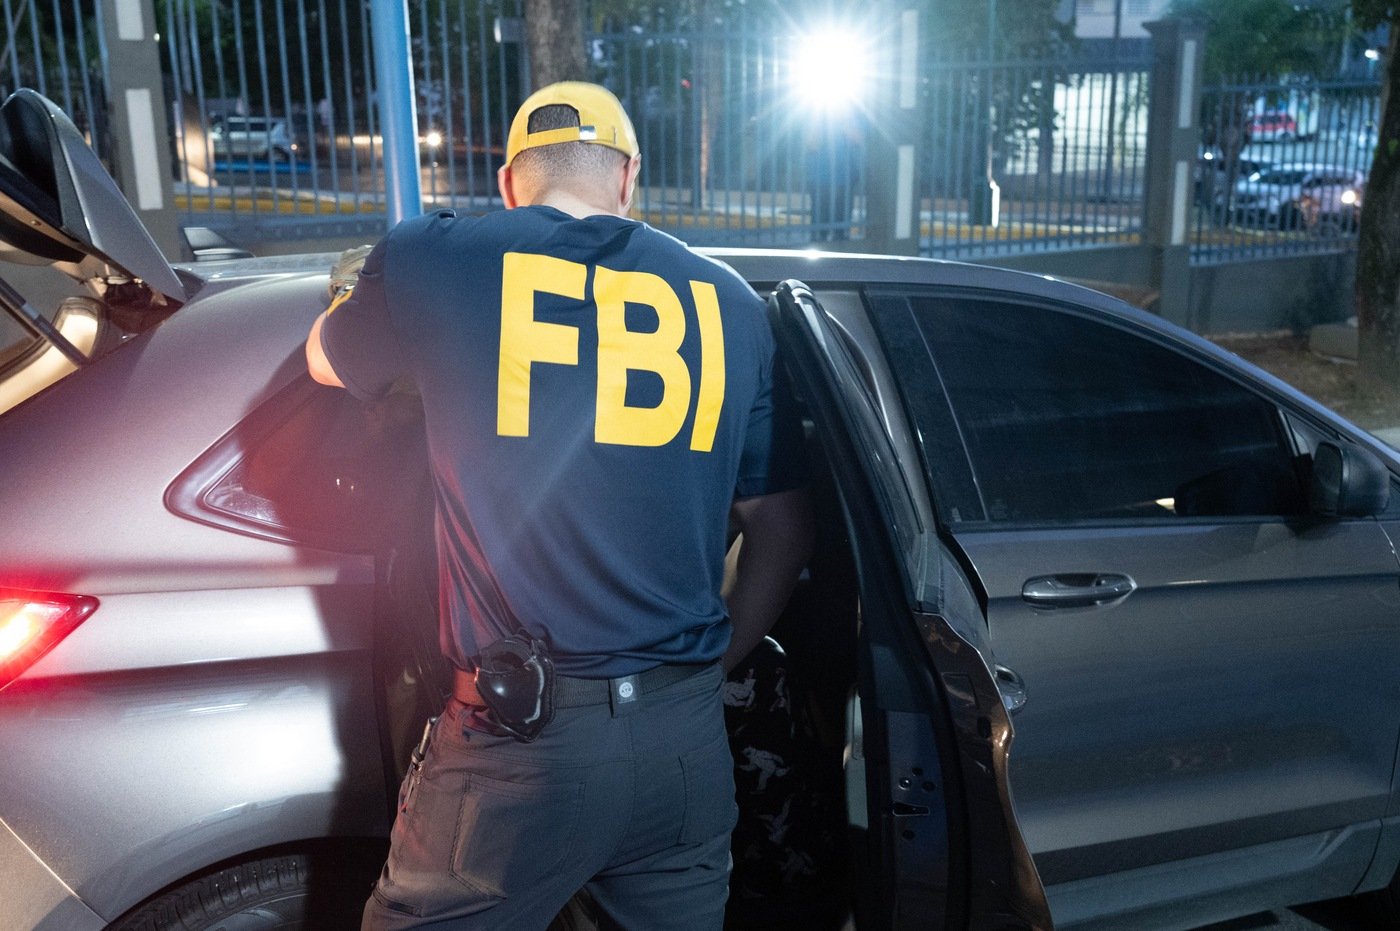 An investigation led by the FBI, with the assistance of several local and federal organizations, has resulted in the arrests and indictments of dozens of members of a violent drug trafficking gang, Los 1,500, based in San Juan, Puerto Rico.